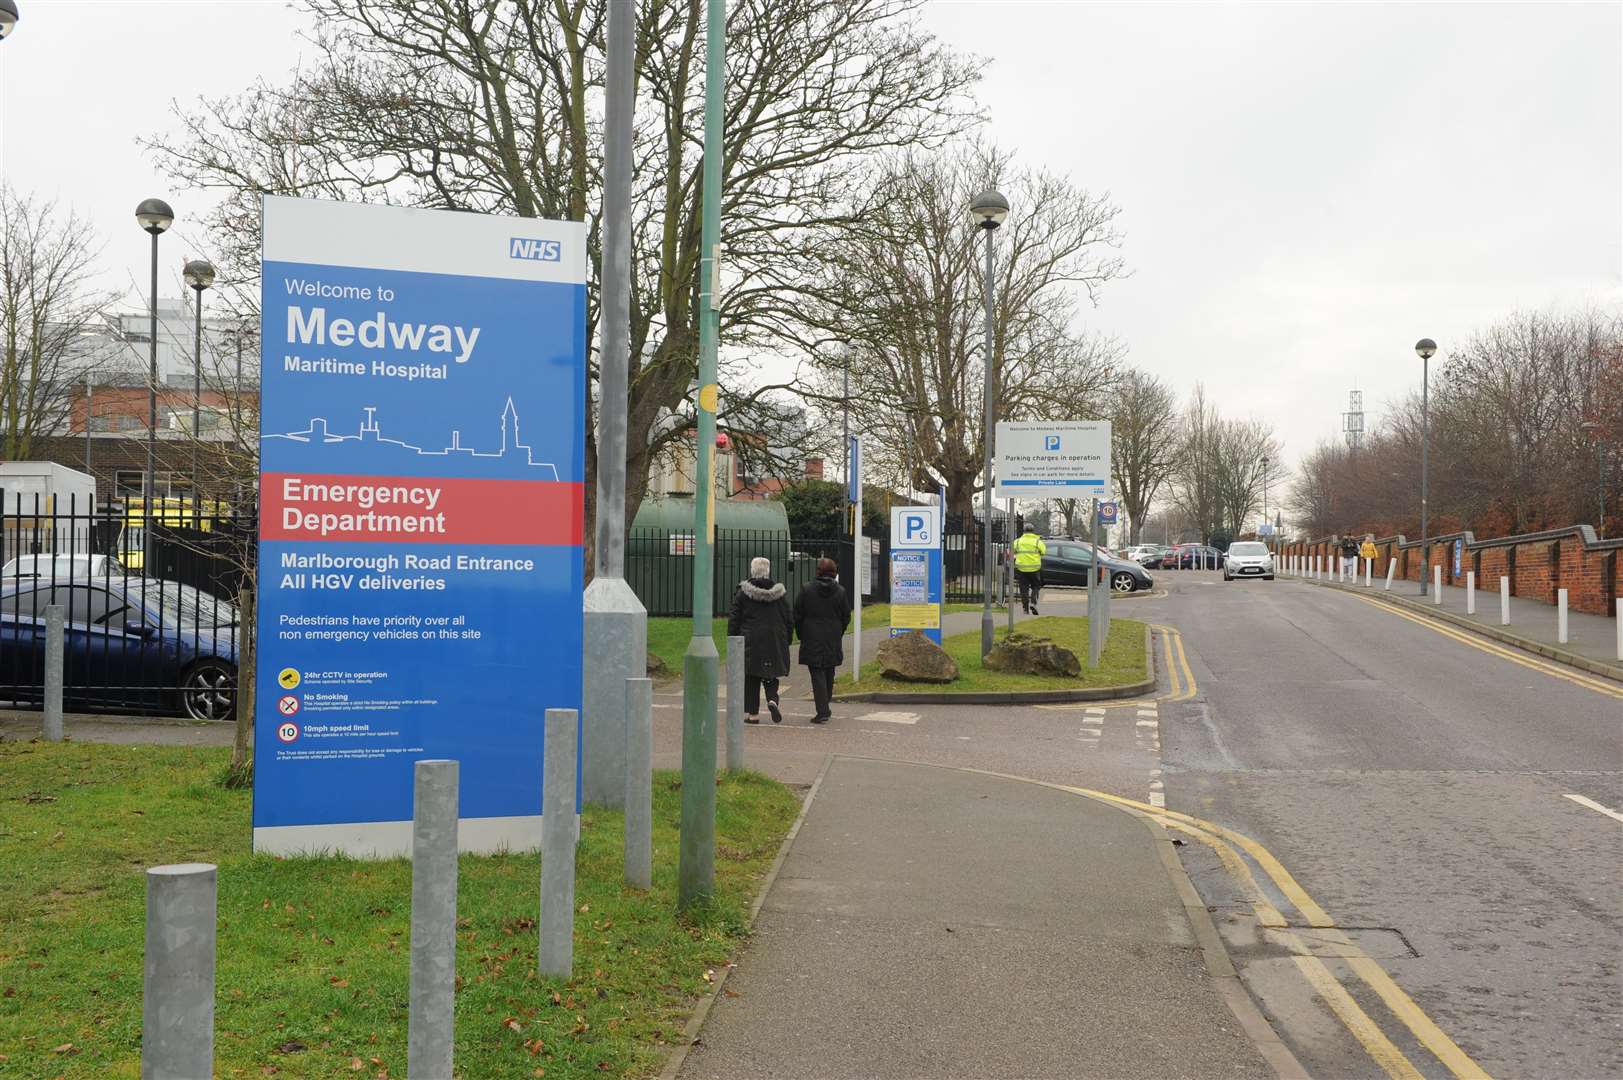 The family were on their way to Medway Maritime Hospital